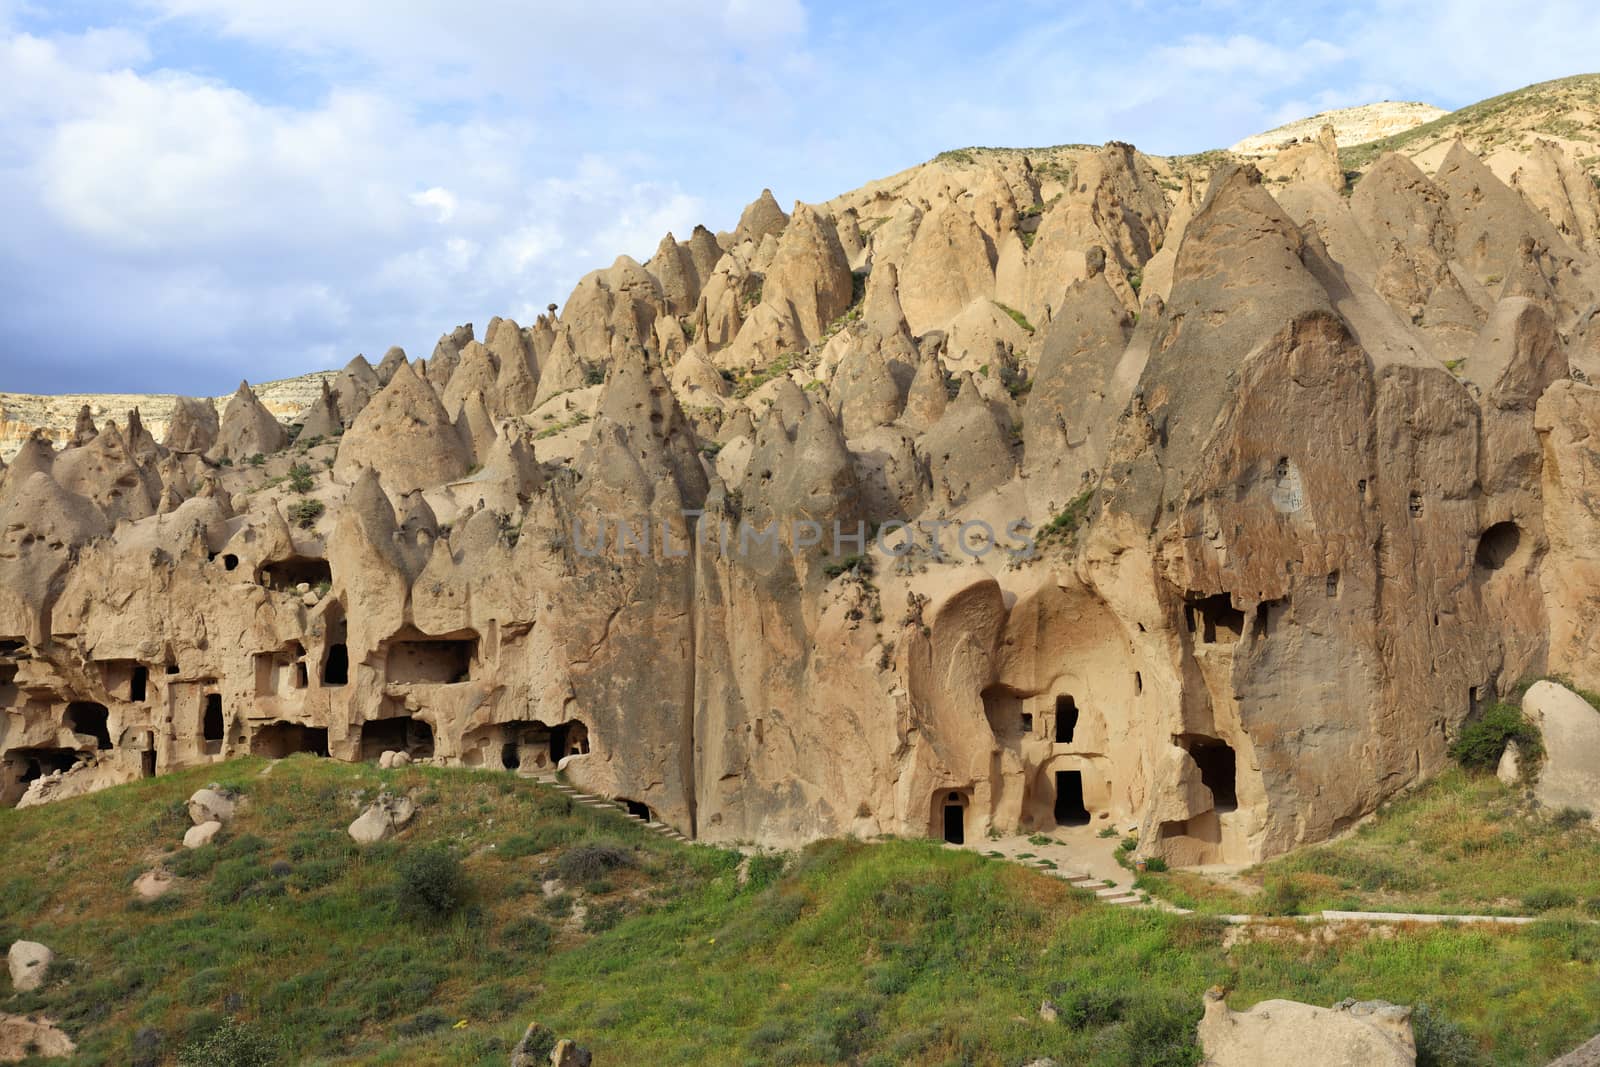 Old antique residential caves on the background of the conical ridges of Cappadocia and the blue cloudy sky